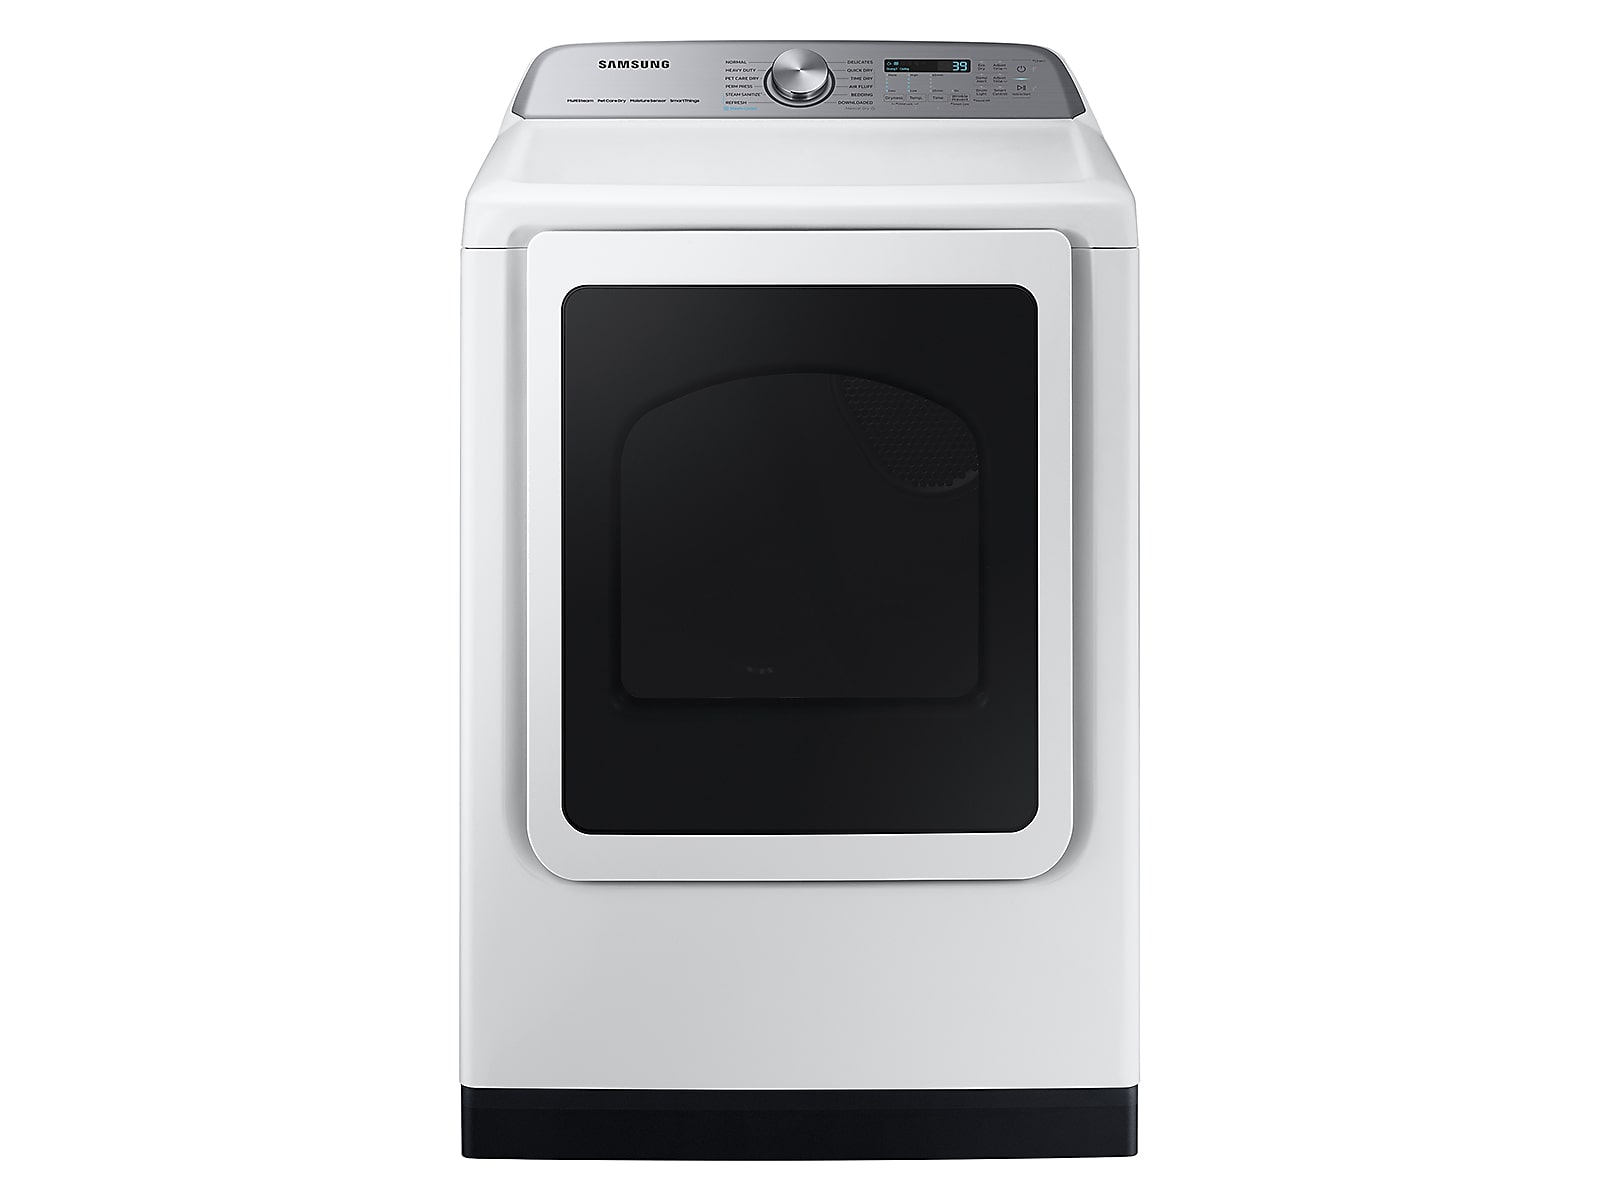 Samsung 7.4 cu. ft. Smart Gas Dryer with Pet Care Dry and Steam Sanitize+ in White(DVG54CG7150WA3)